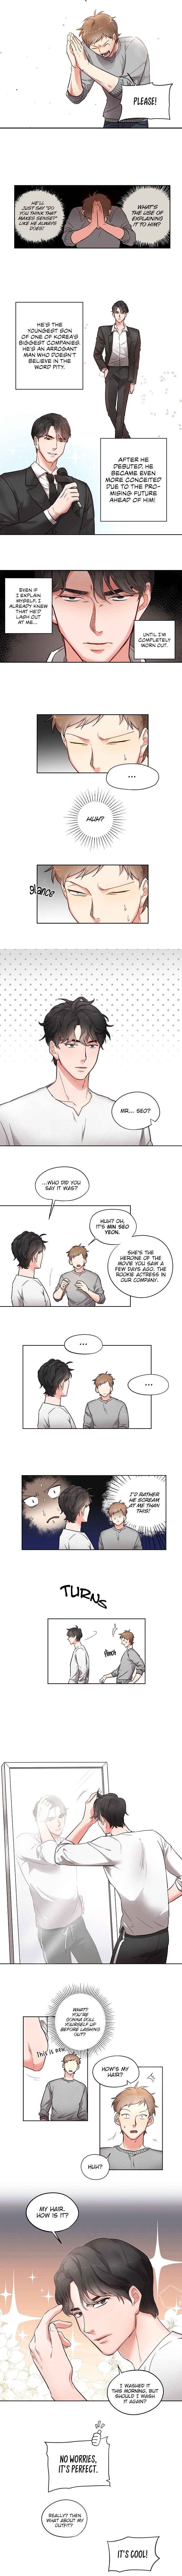 Liking you Excitedly Chapter 2 - Page 4